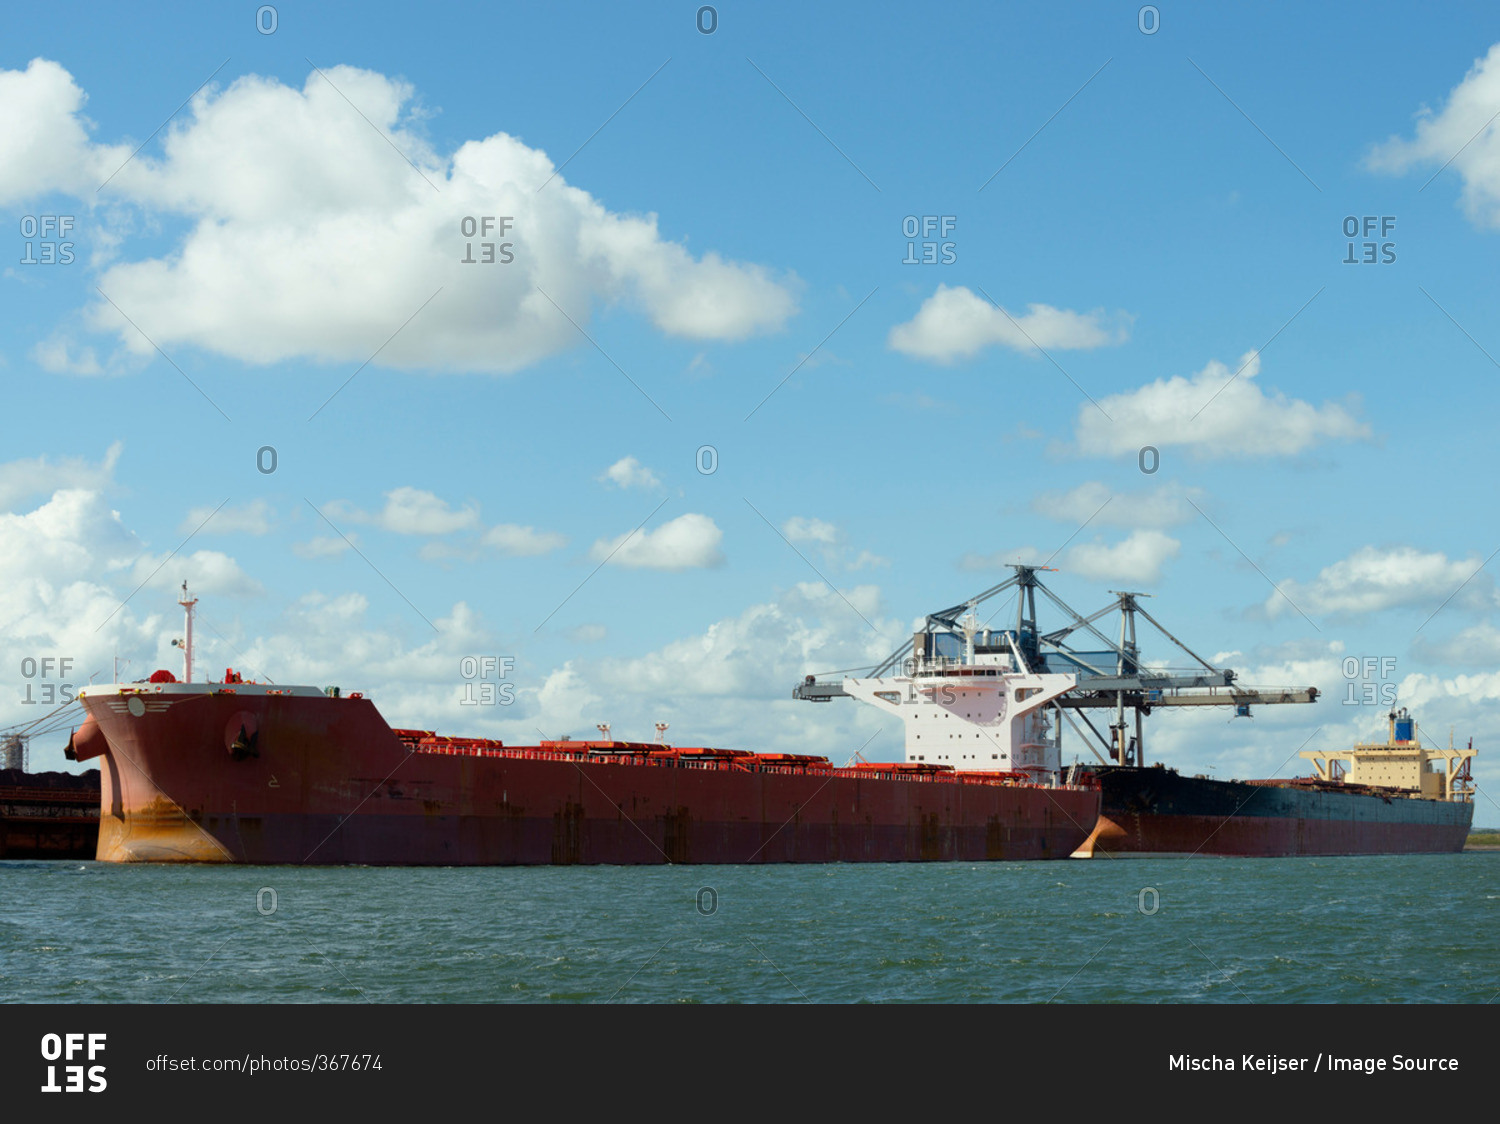 Huge ships moored in the Rotterdam harbor, used for transporting coal and iron ore